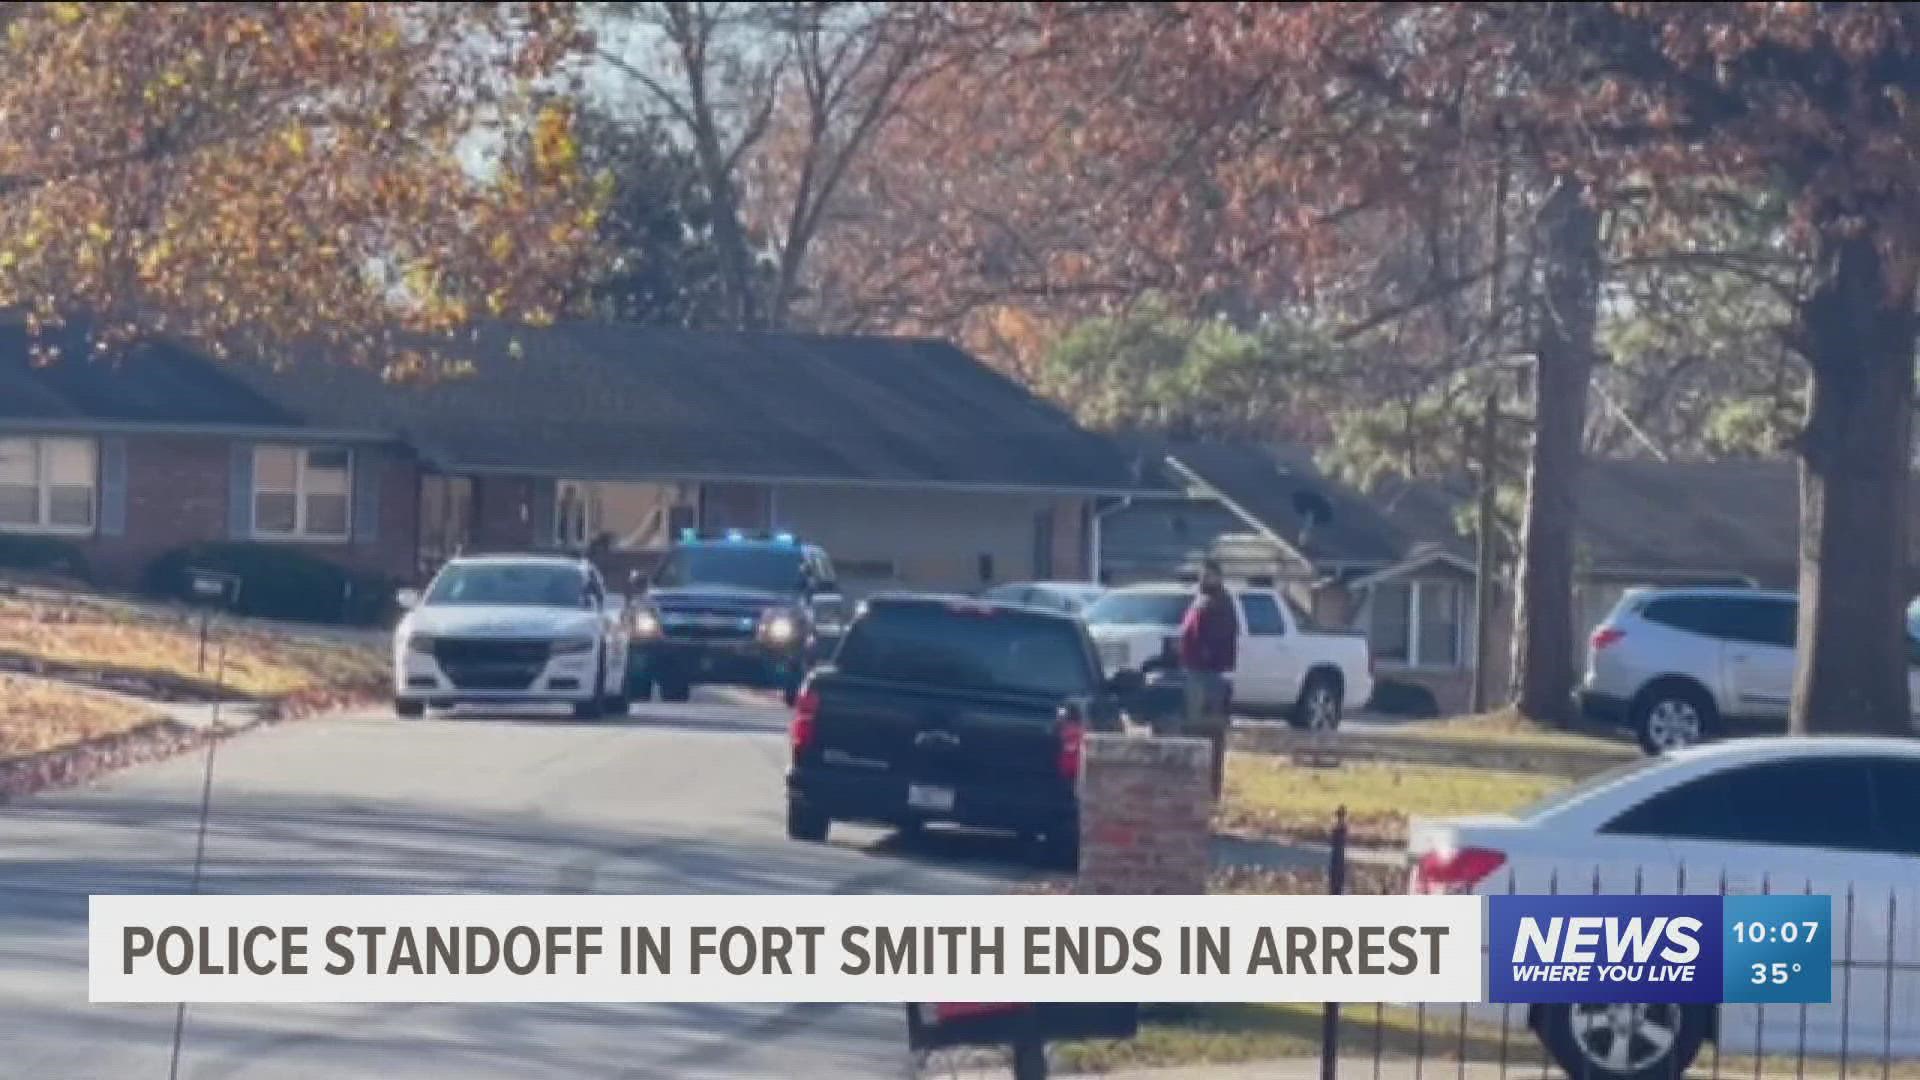 The standoff lasted about two hours before one man was taken into custody.